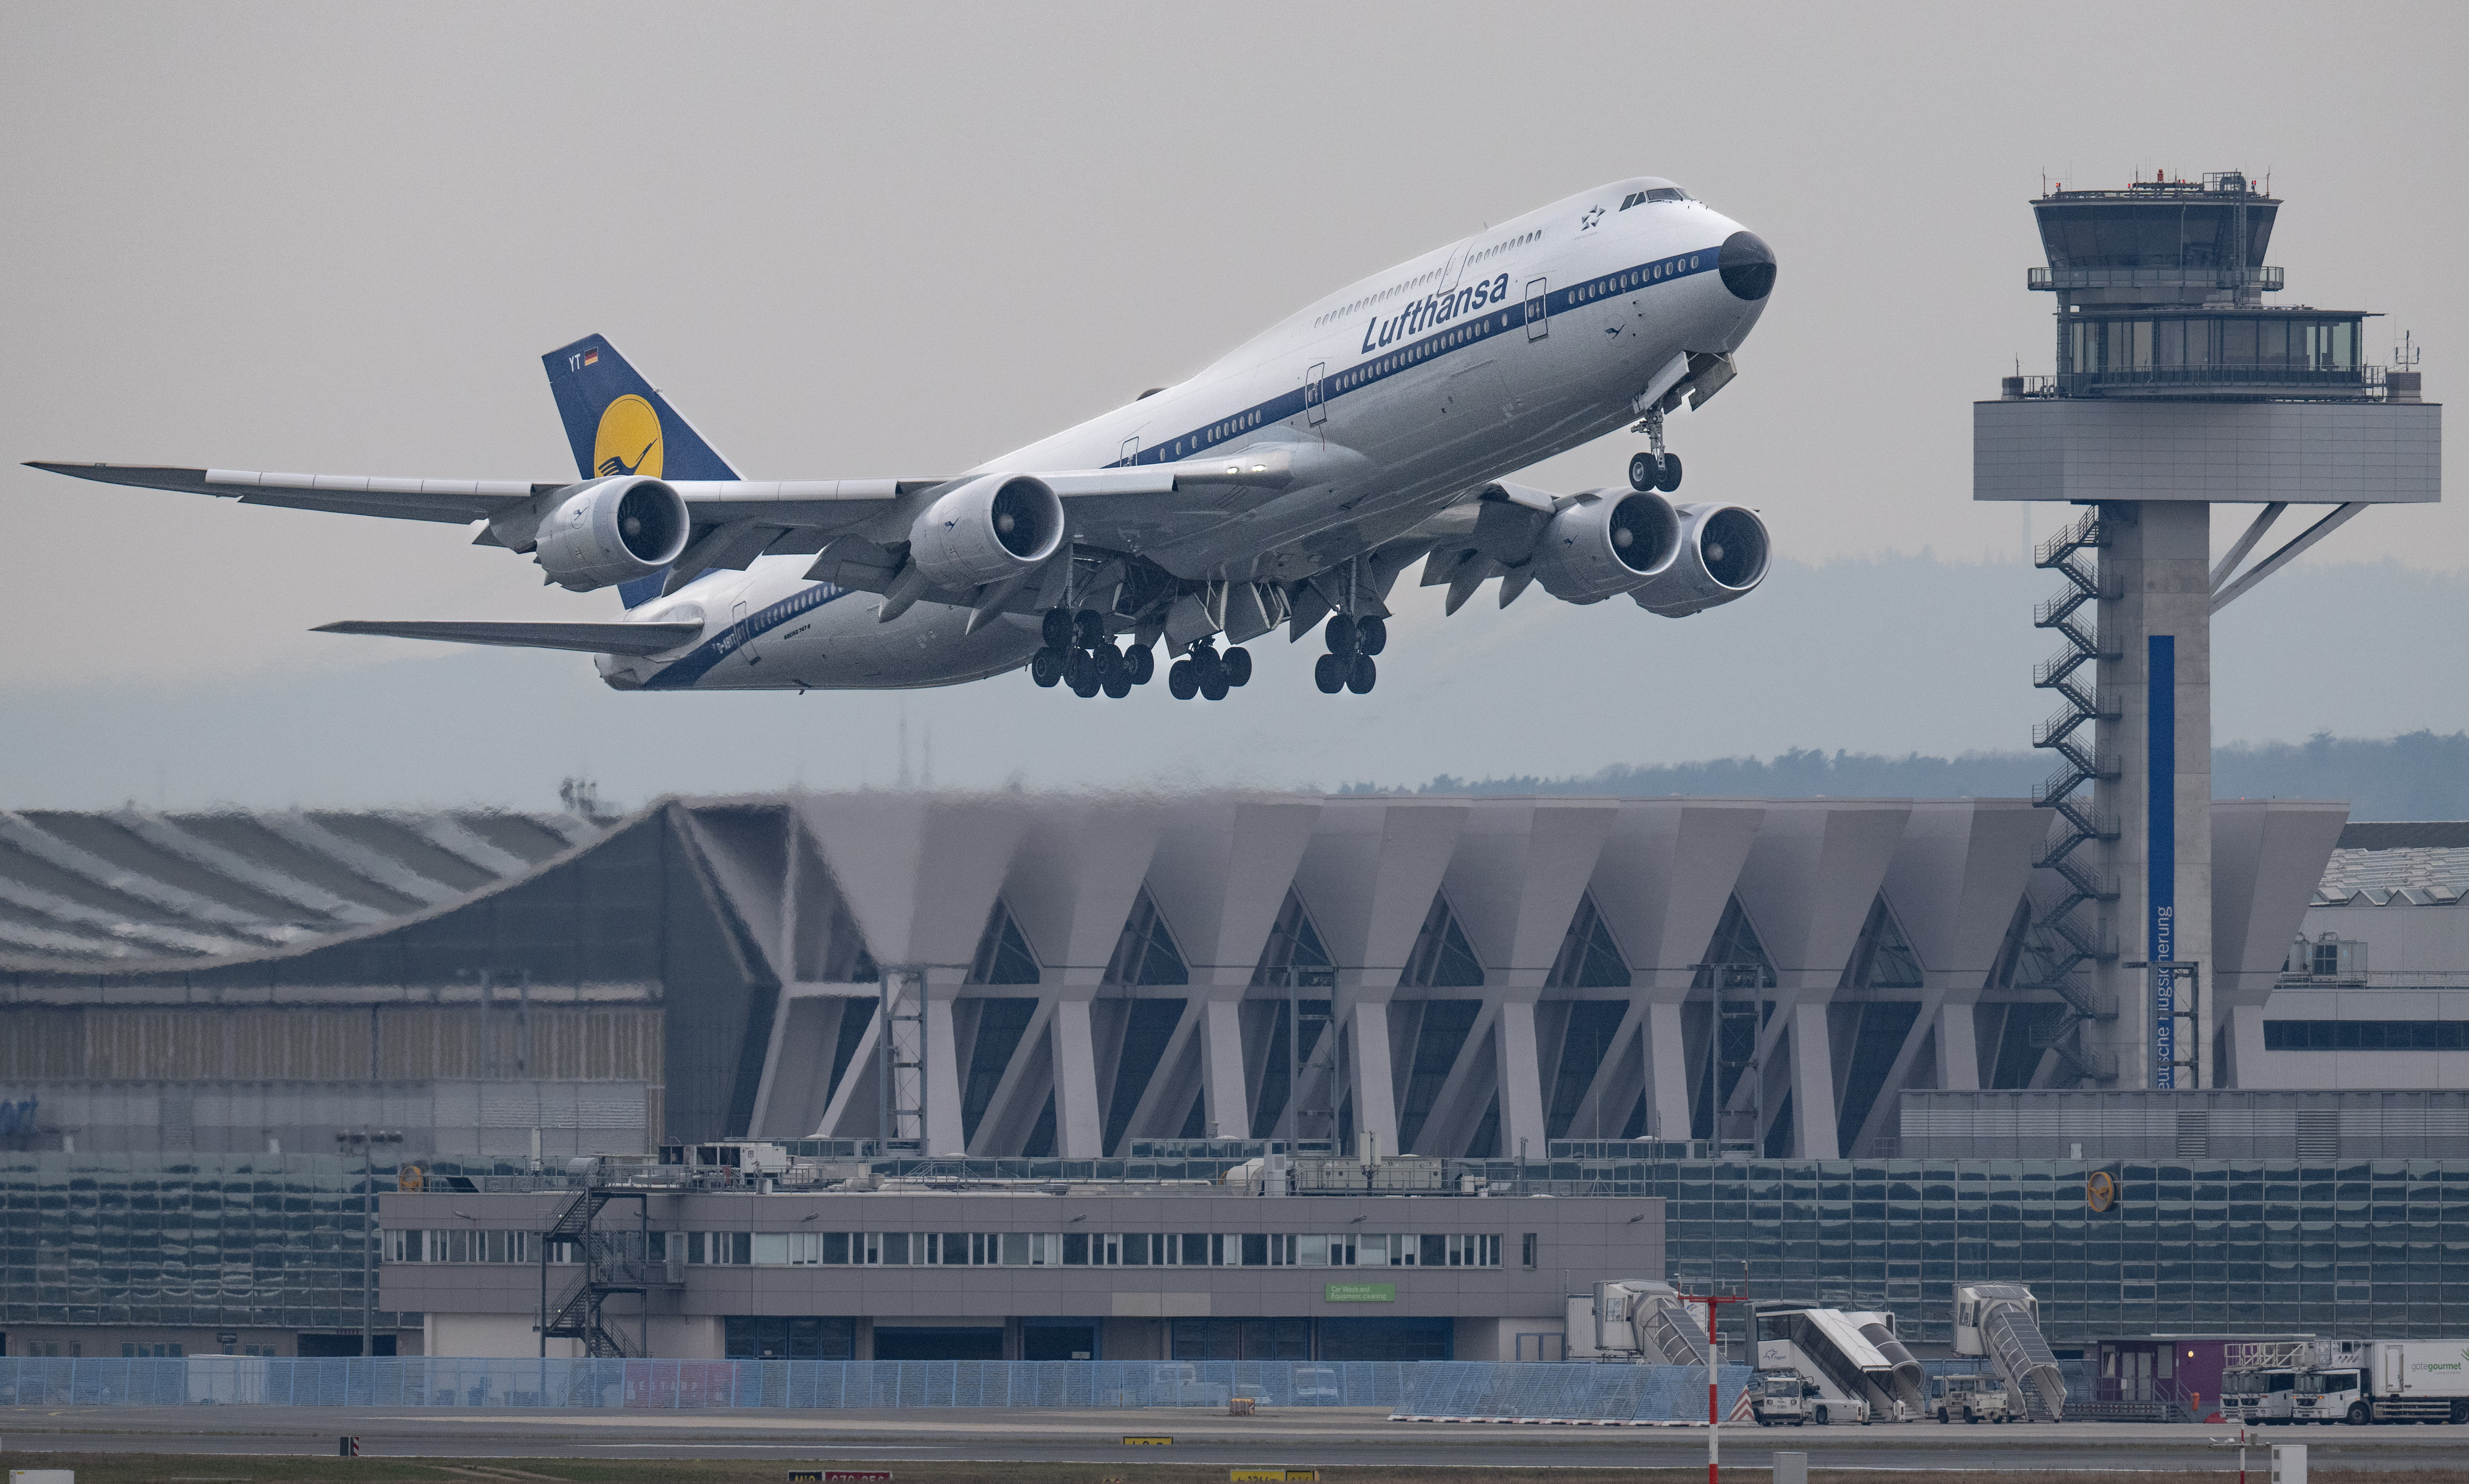 A Lufthansa airplane takes off from an airport, with the terminal visible in the background